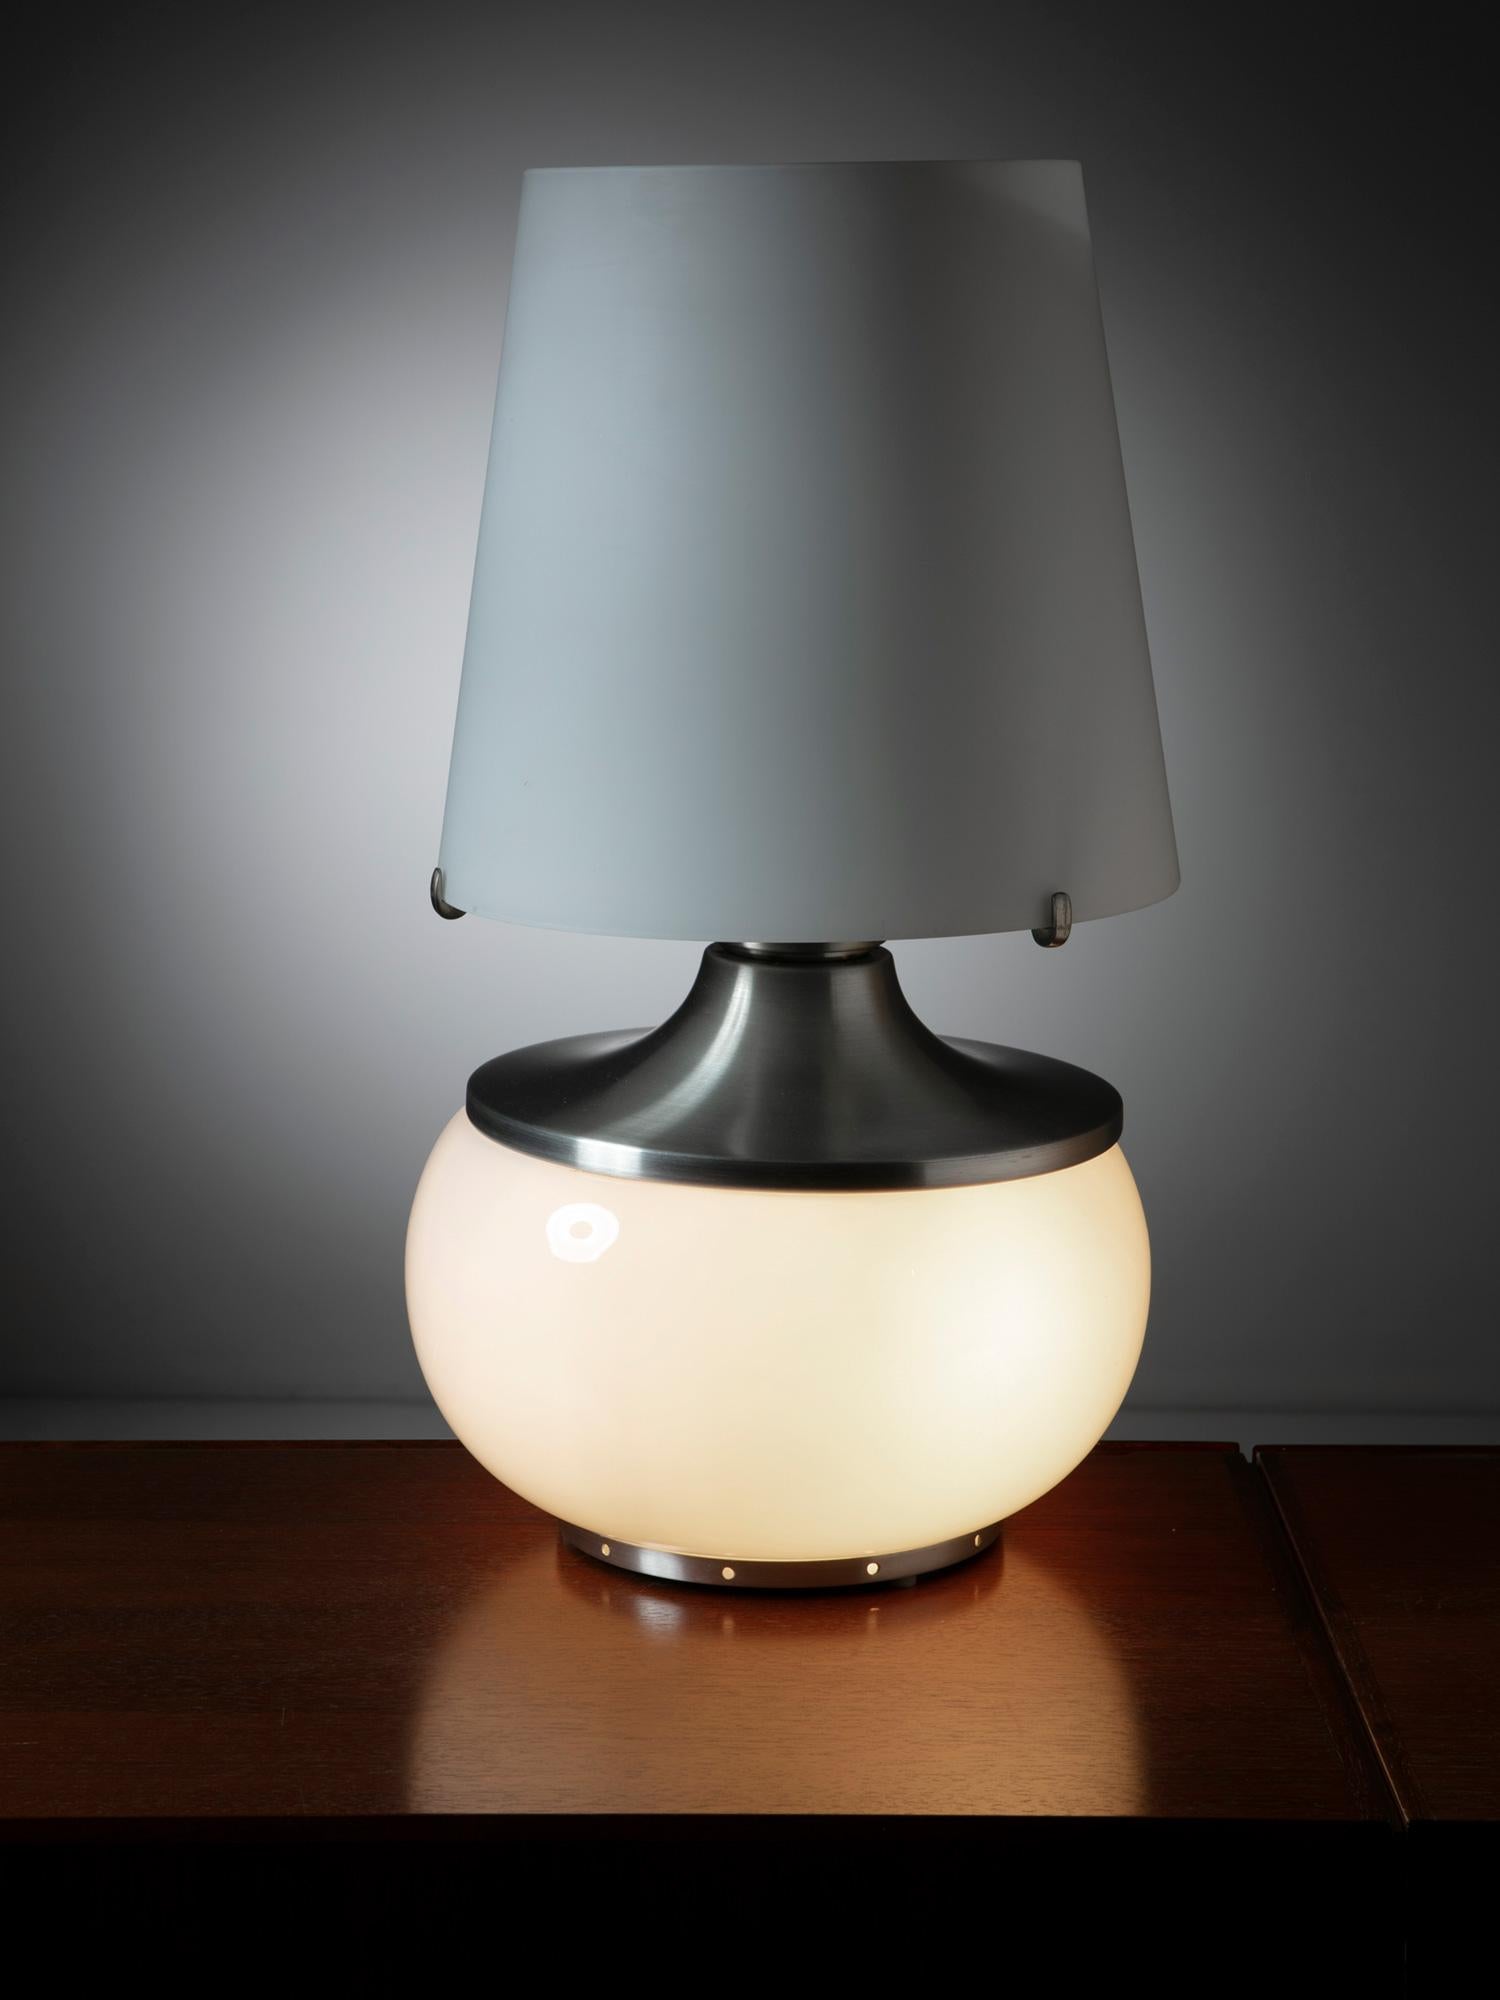 Large table lamp model 879 by Pia Guidetti Crippa for Lumi.
Base and shade lights can work separately.
 